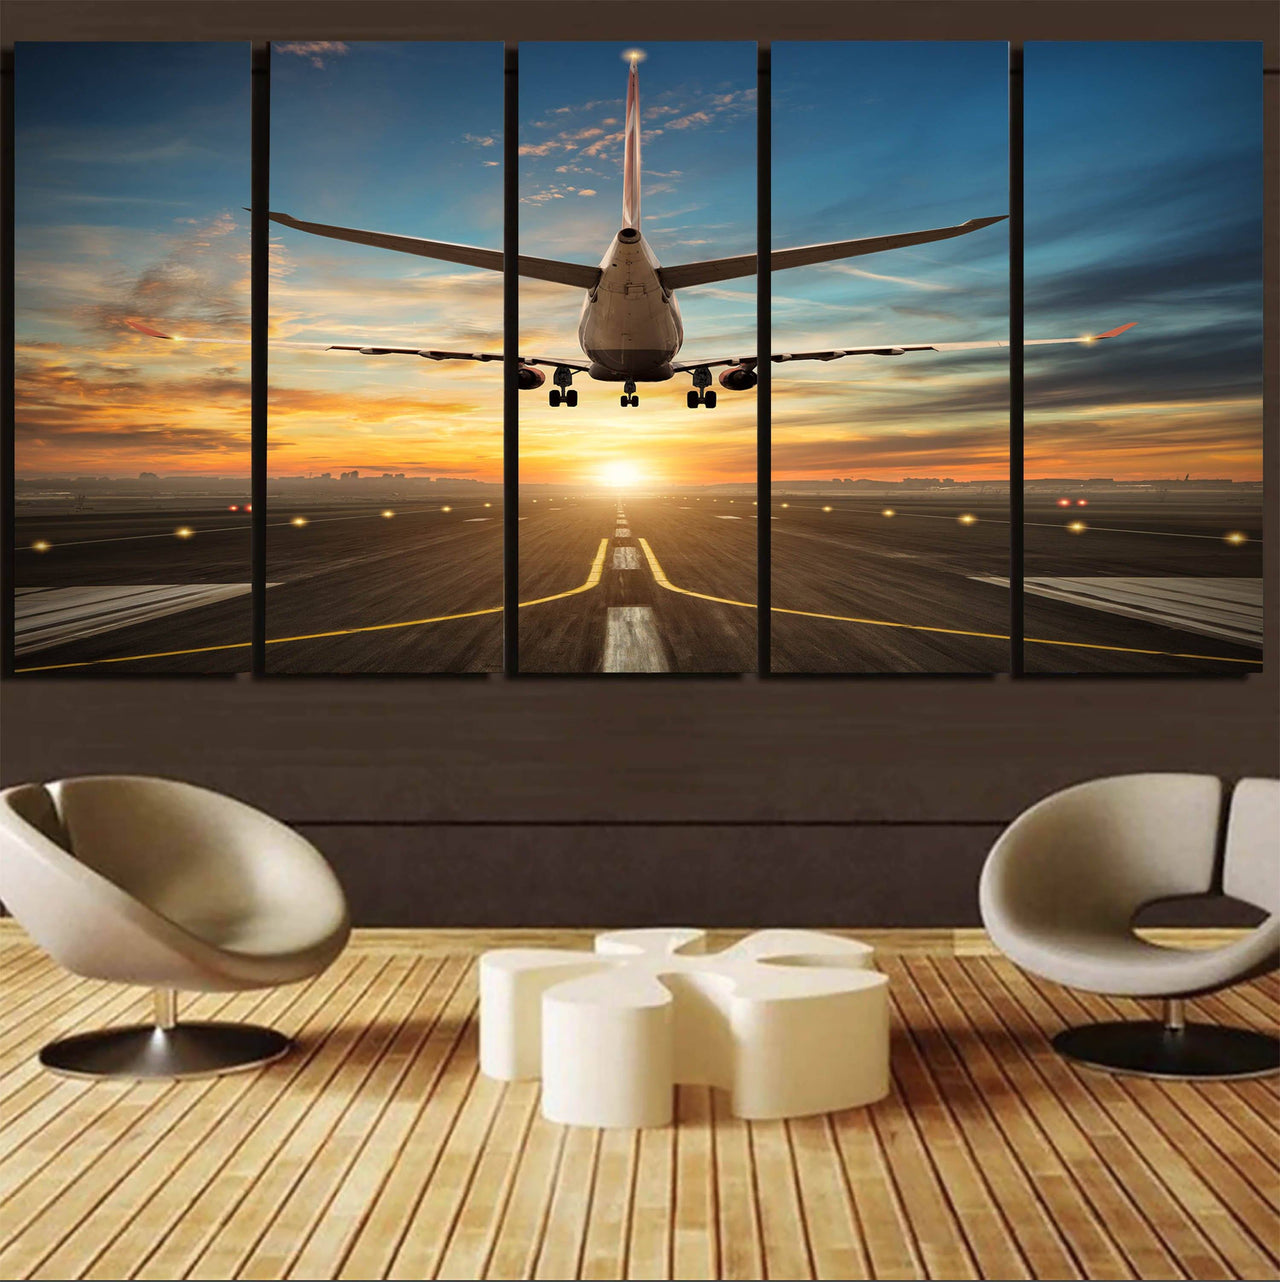 Airplane over Runway Towards the Sunrise Printed Canvas Prints (5 Pieces) Aviation Shop 